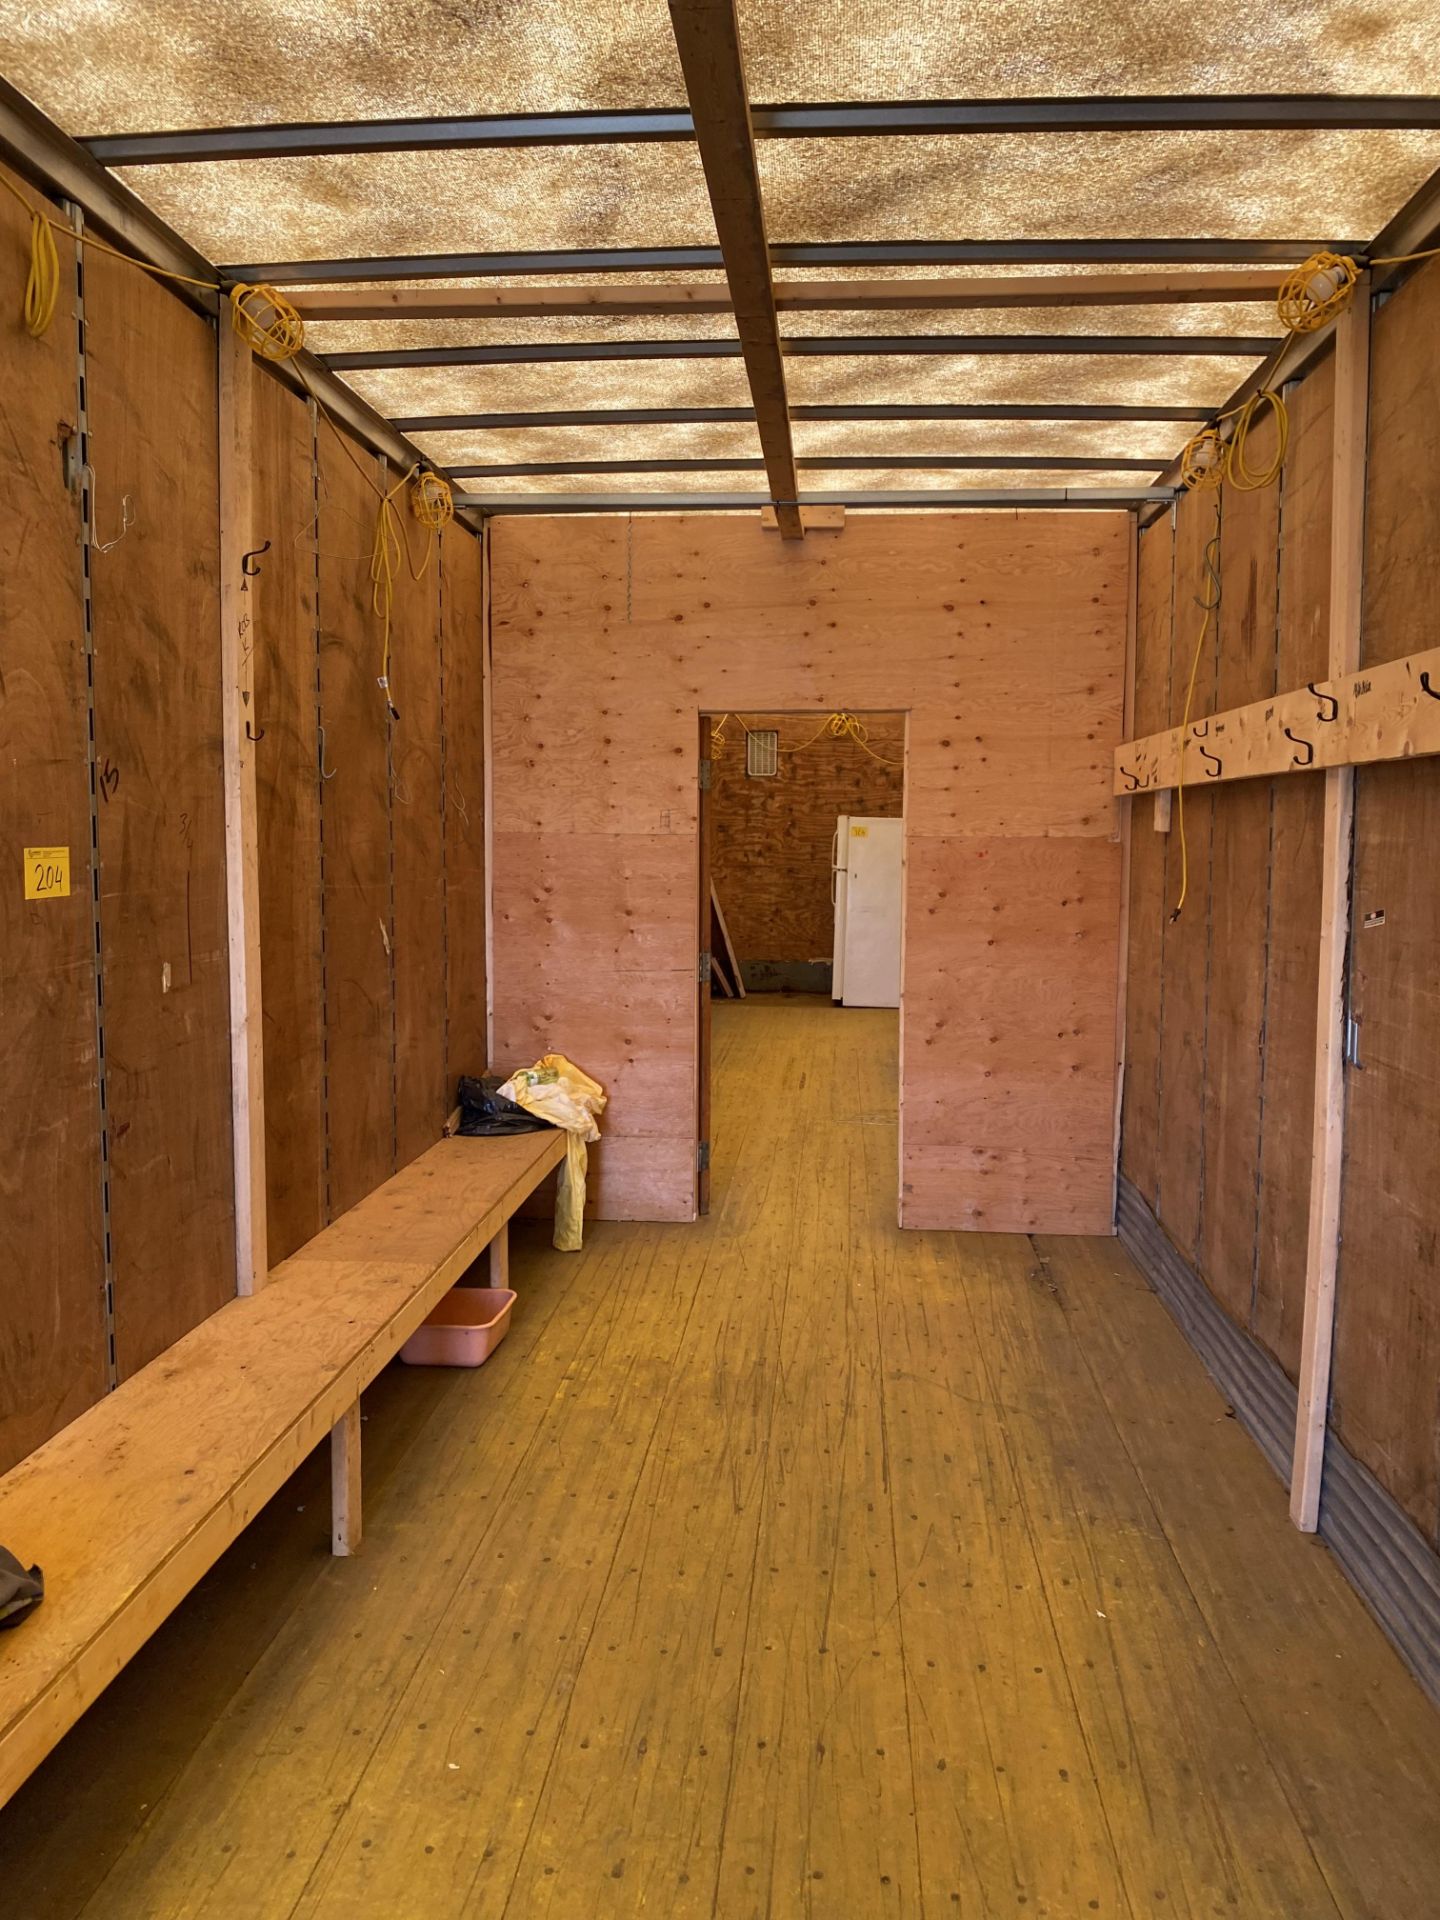 GREAT DANE 53' OFFICE CONTAINER (RIGGING FEE $500 USD) - Image 4 of 6